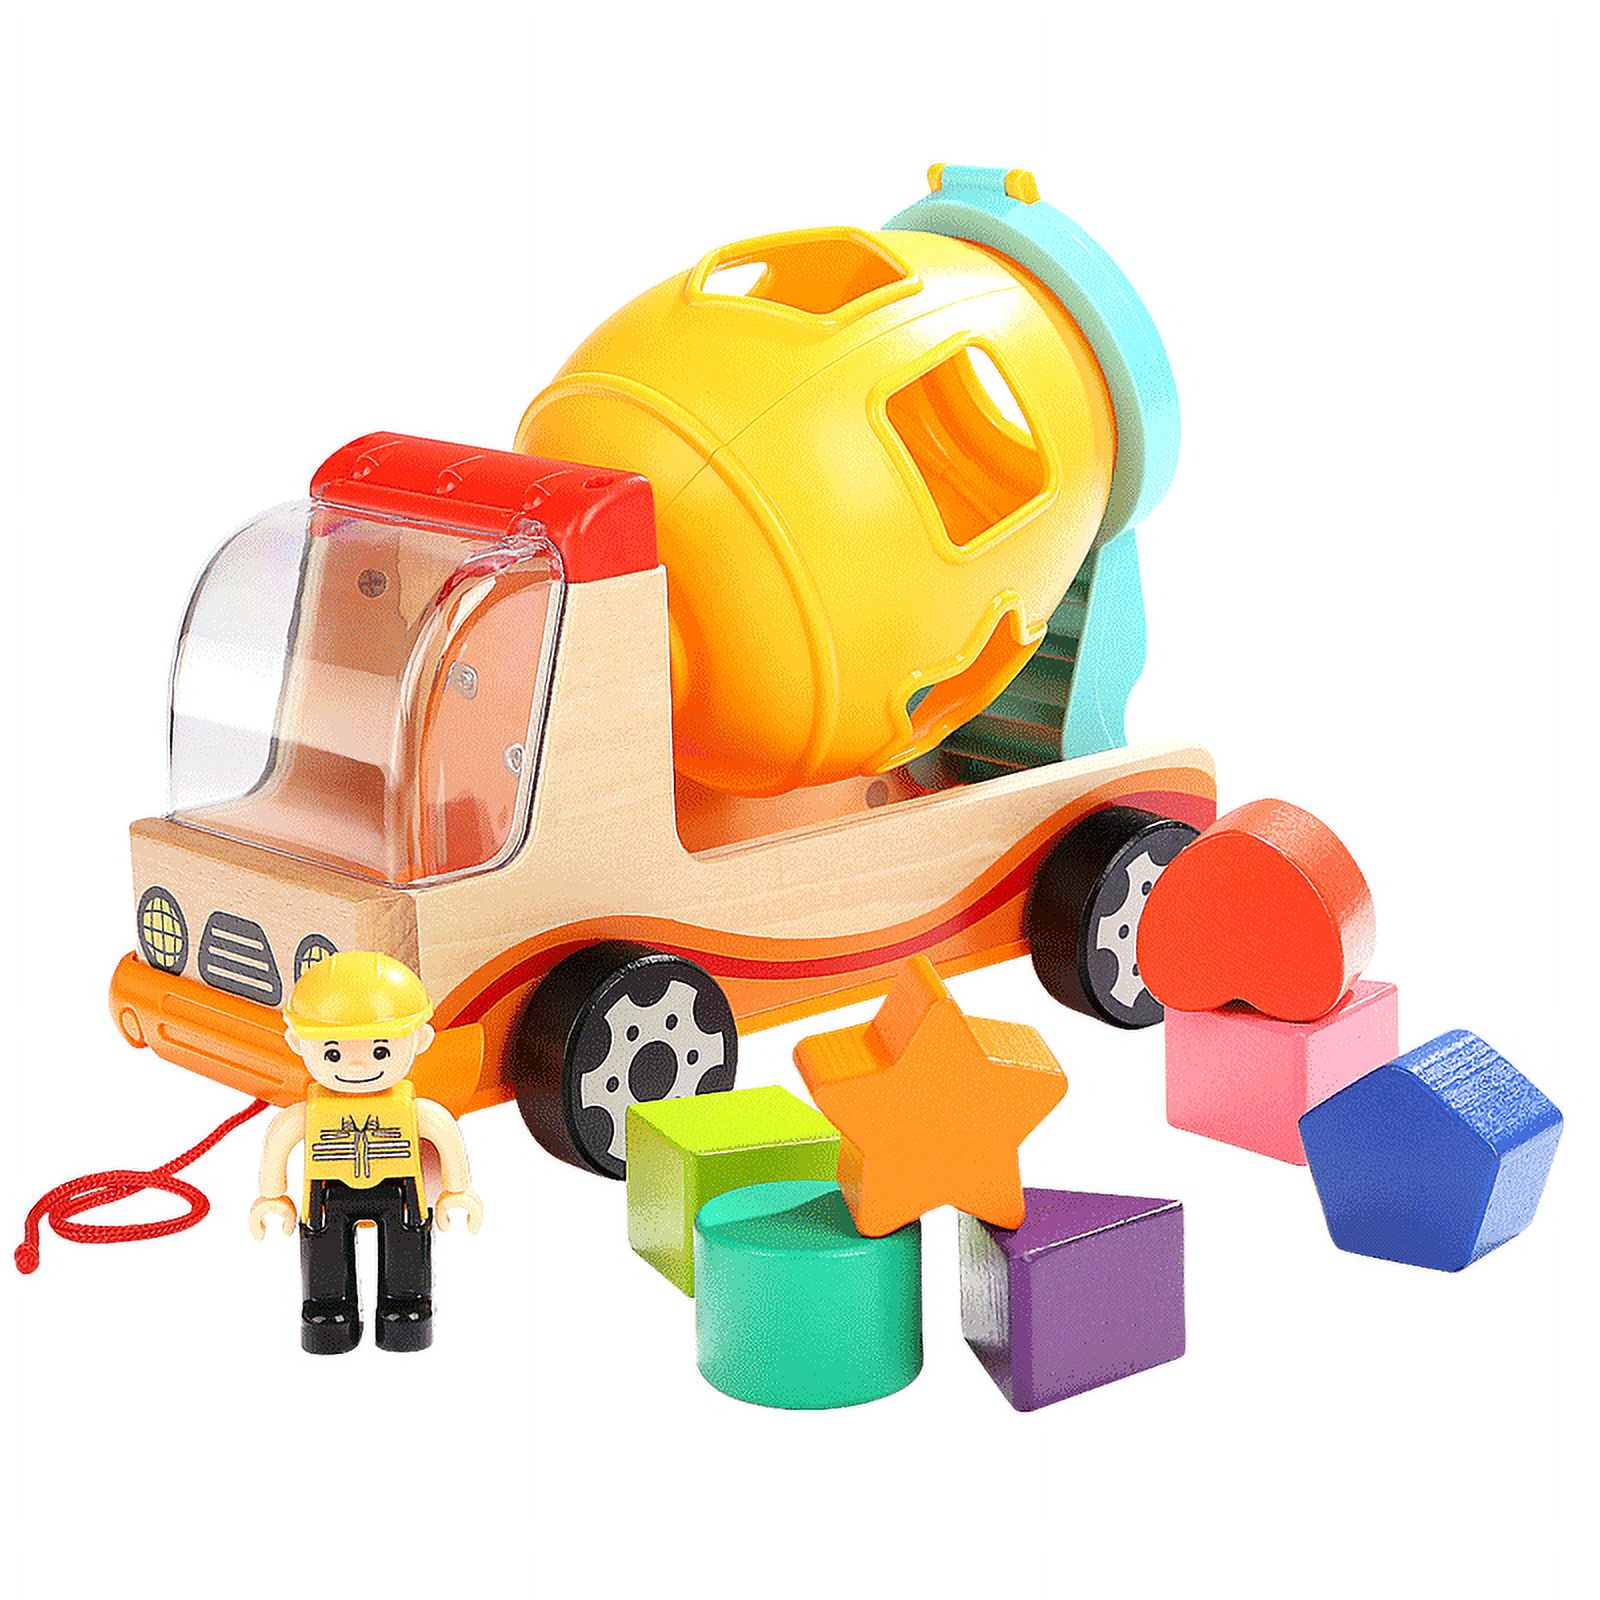 Top Bright - Mixer Truck with Shape Sorter for Toodlers Preschool Learning Toy - image 5 of 6